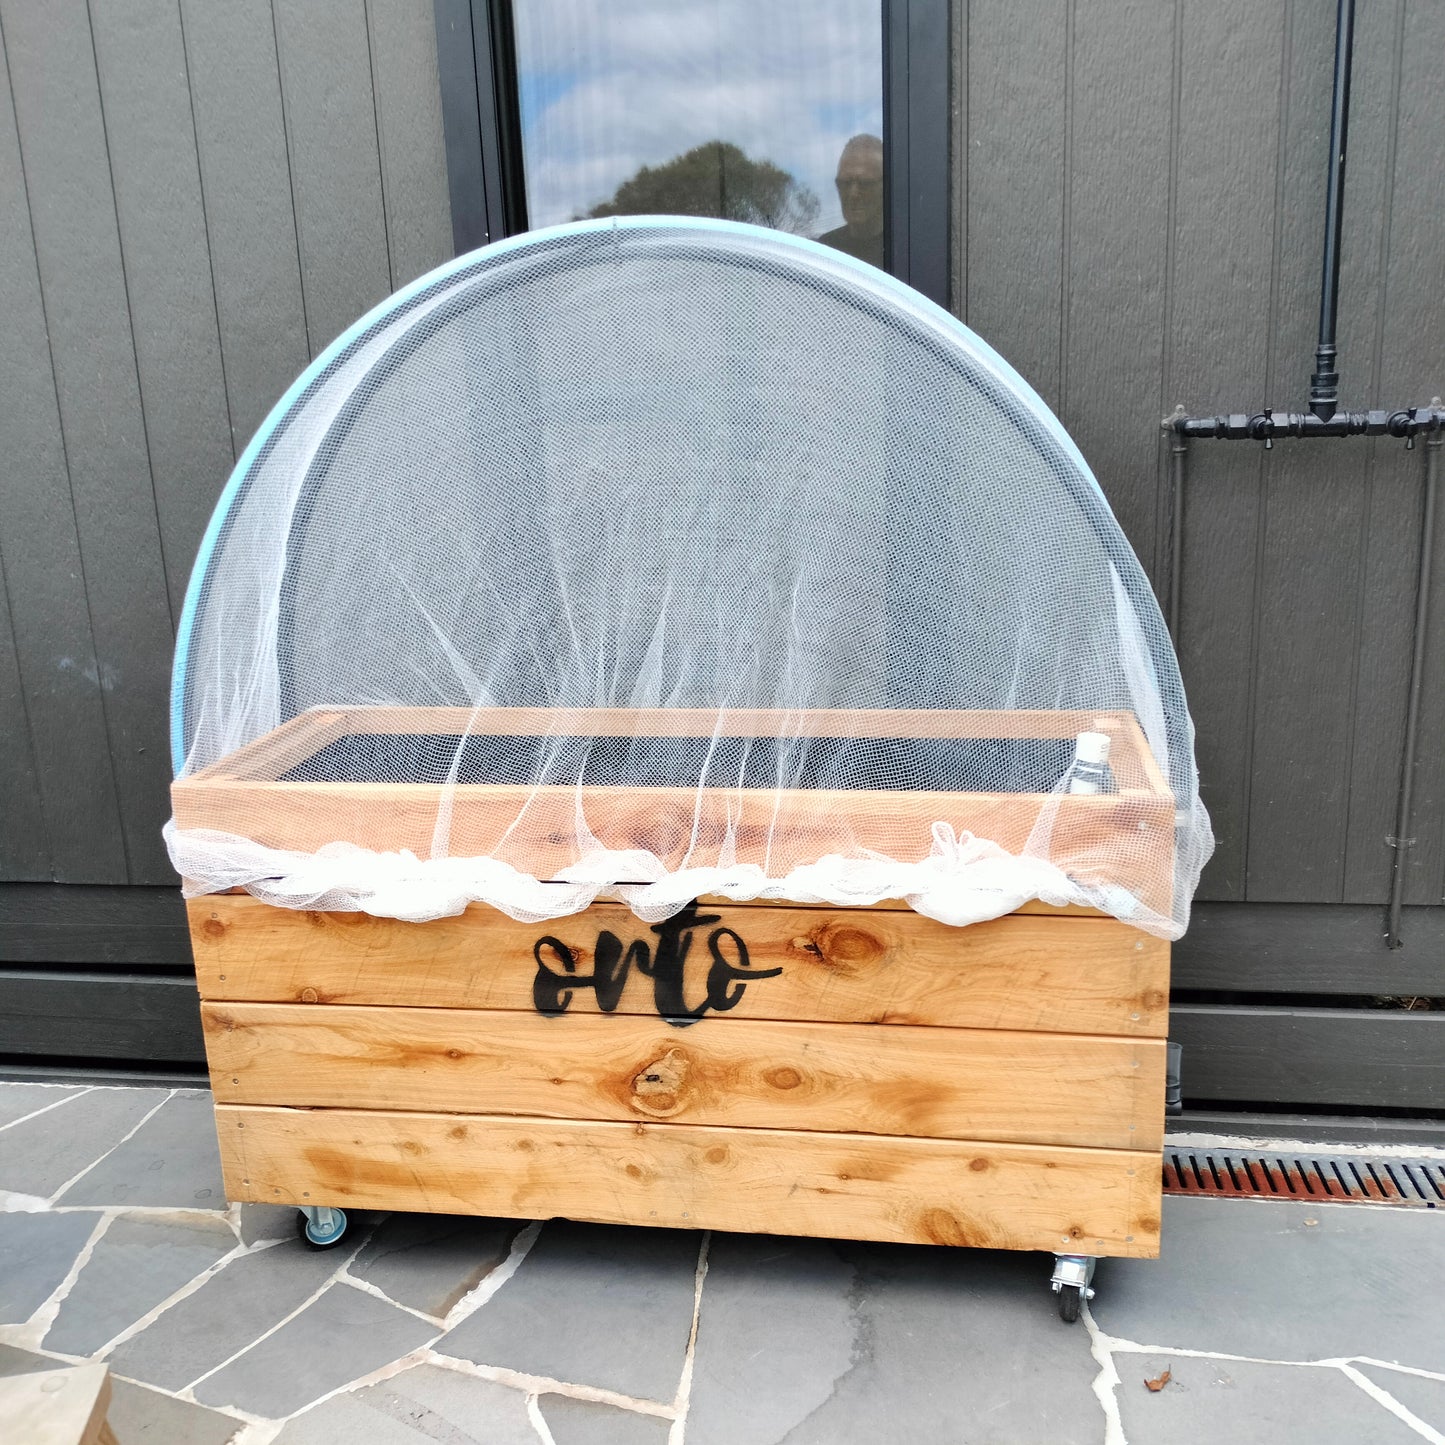 Bird Net Cover for Self Watering Planter Boxes